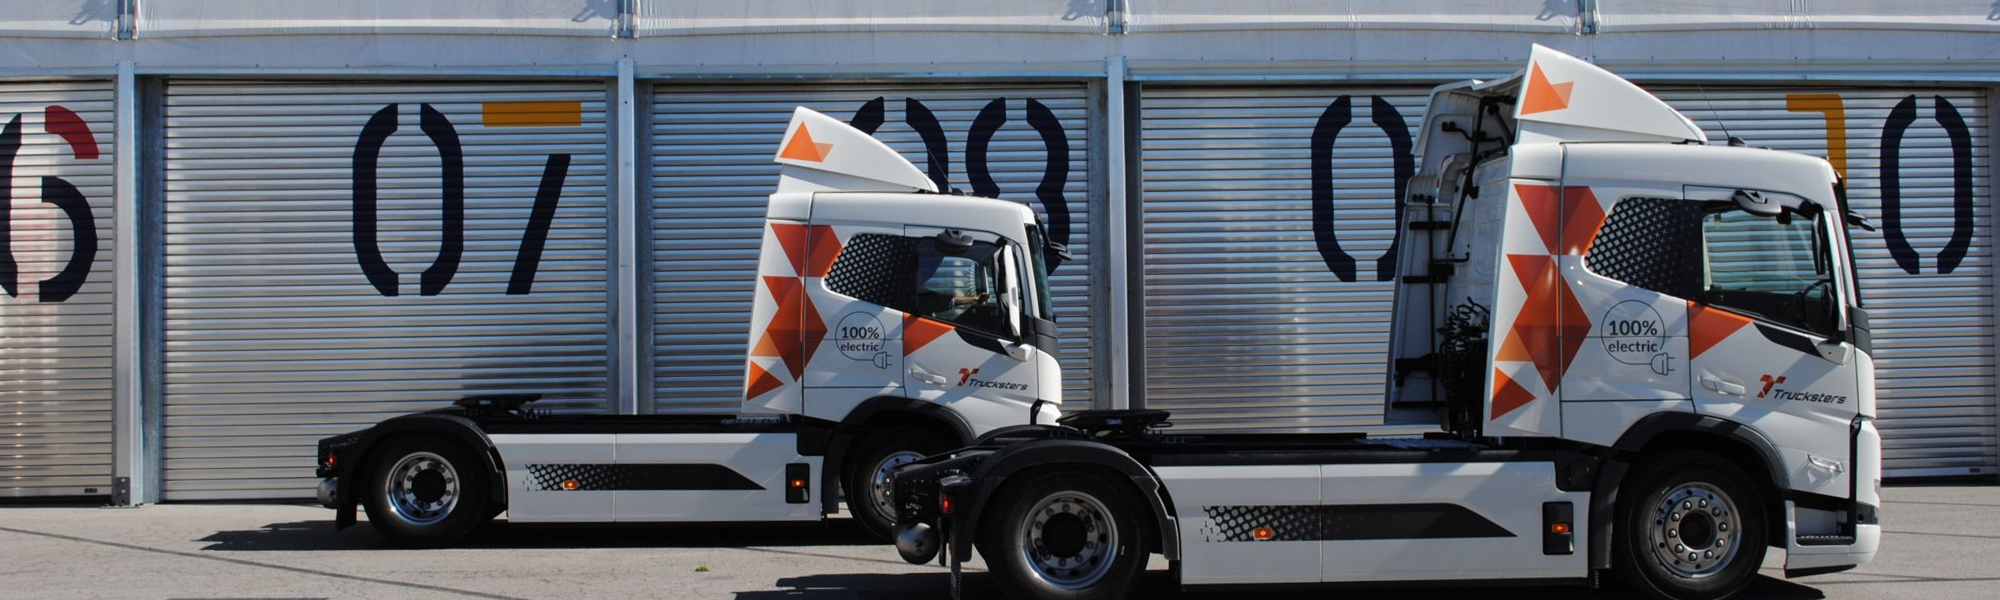 Rocking the boat: Setting up scalable, profitable truck parking in months